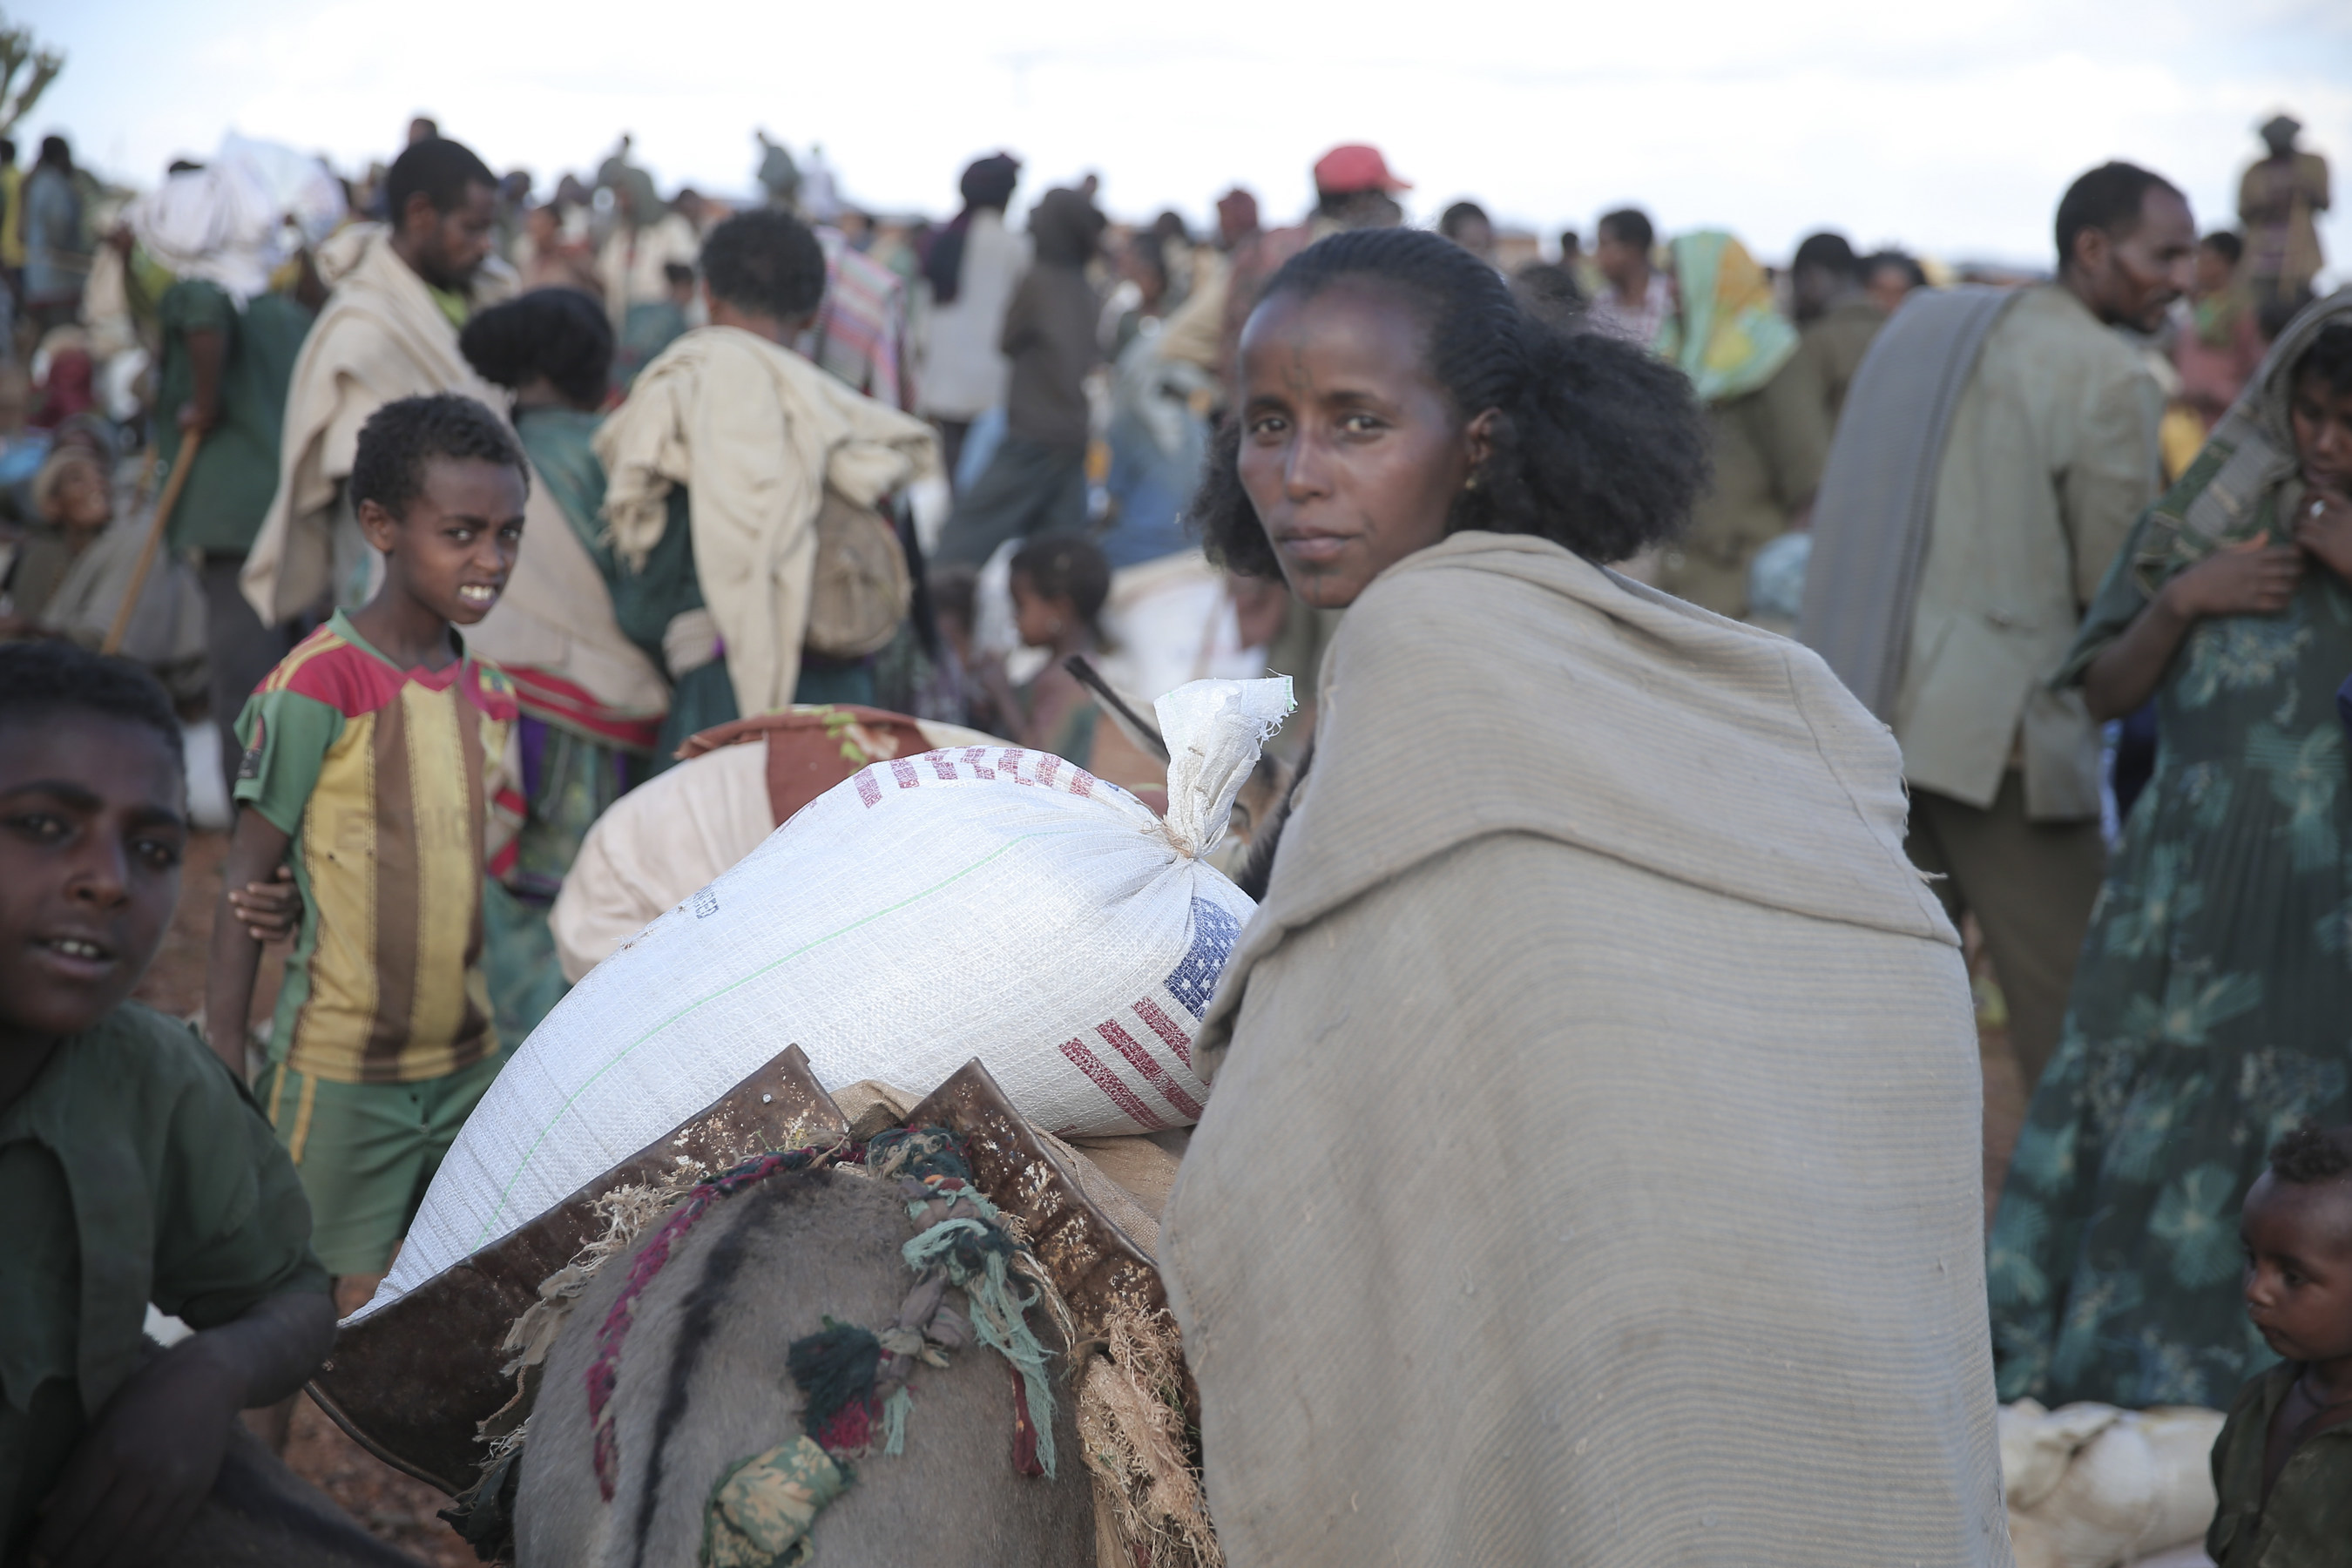 An emergency food aid distribution in the Amhara Region of Ethiopia. Save the Children, in partnership with the Organization for Rehabilitation and Development in Amhara (ORDA), is leading the distribution of the food aid for this site.